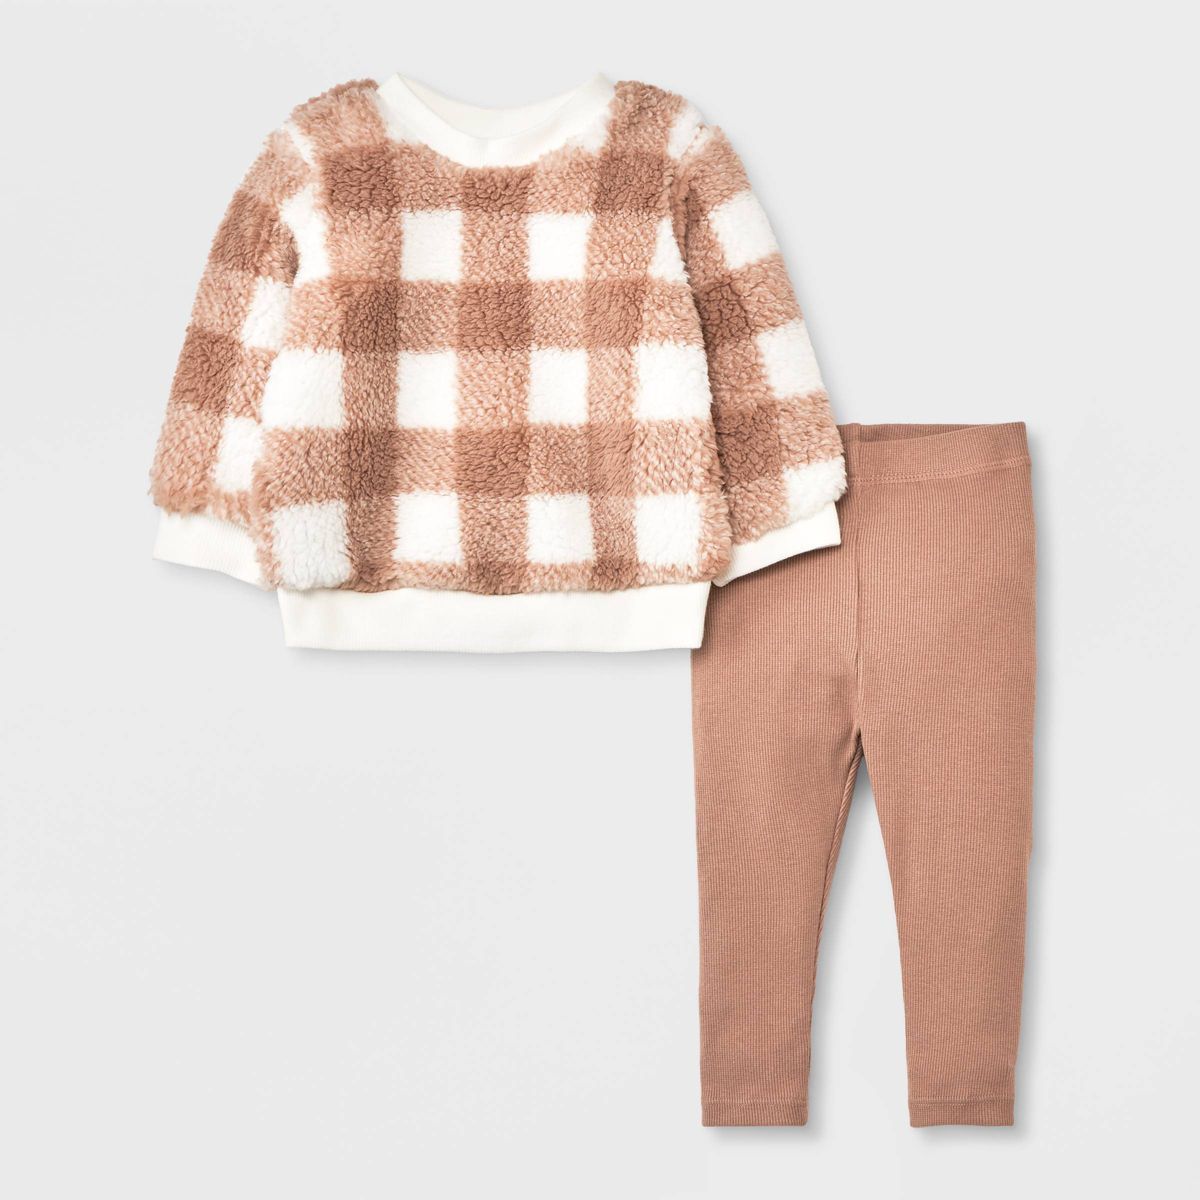 Grayson Collective Baby 2pc Faux Shearling Top & Leggings Set - Brown | Target